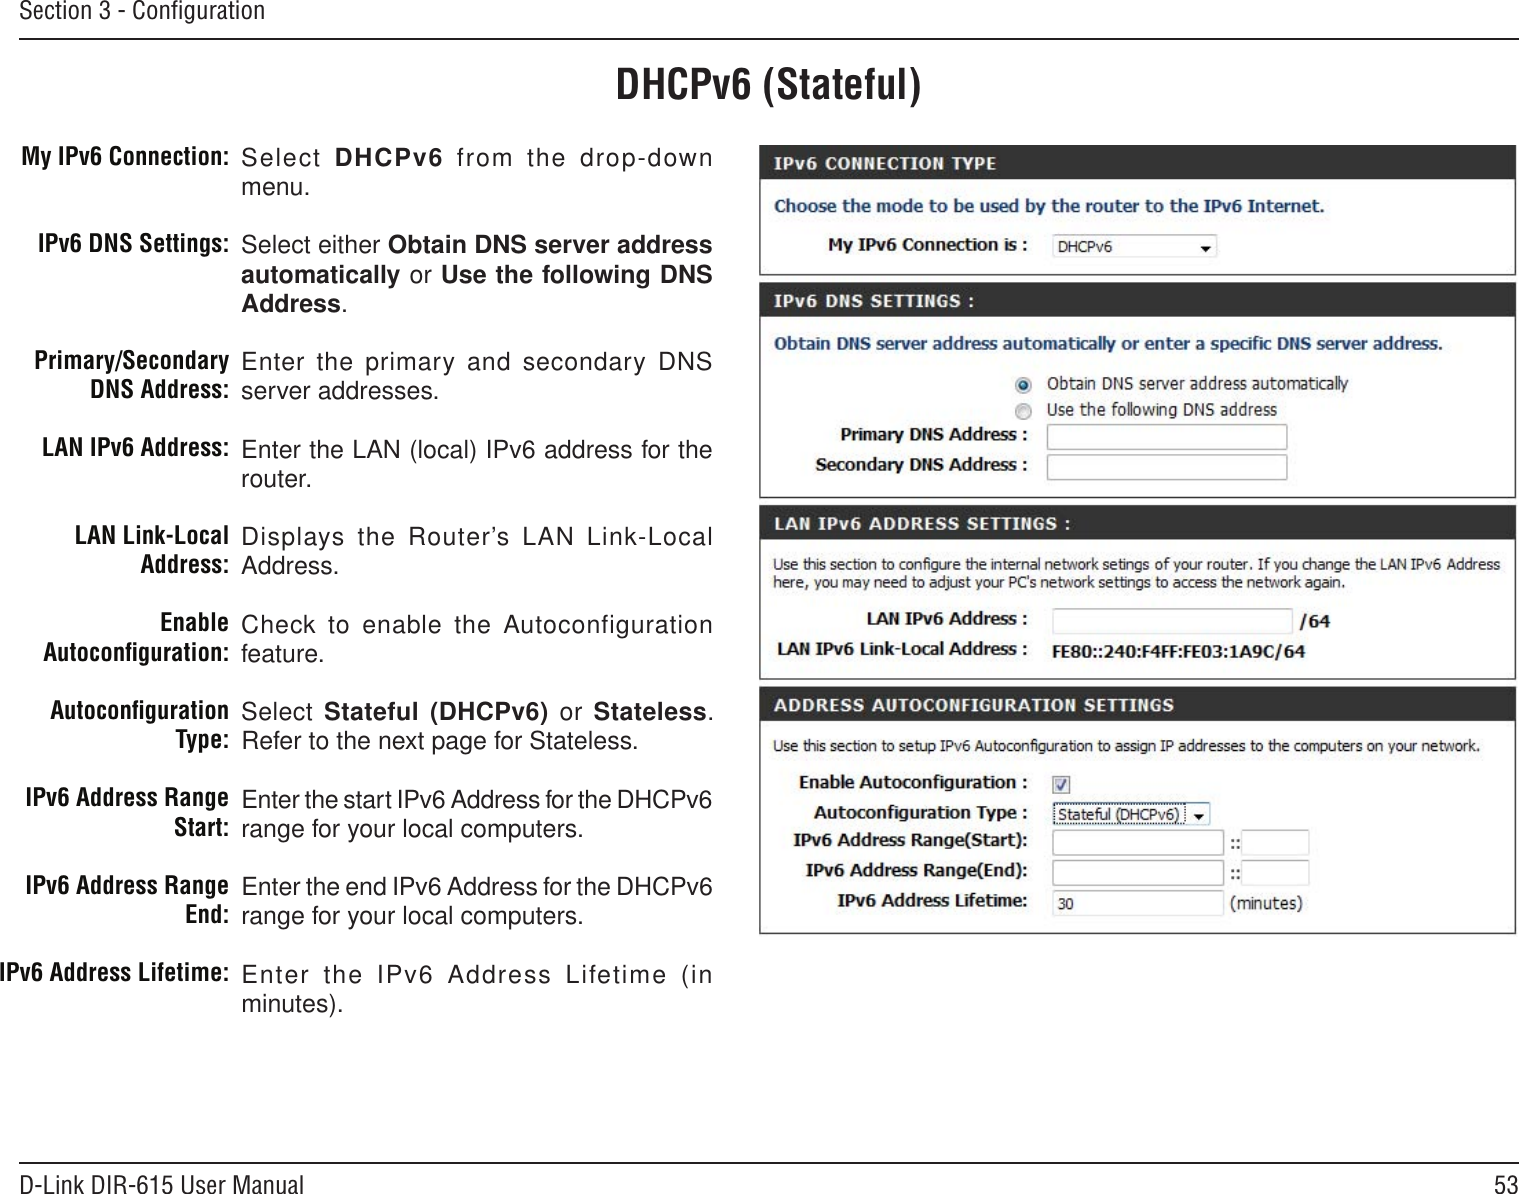 53D-Link DIR-615 User ManualSection 3 - ConﬁgurationDHCPv6 (Stateful)Select DHCPv6  from the  drop-down menu.Select either Obtain DNS server address automatically or Use the following DNS Address.Enter the primary and secondary DNS server addresses. Enter the LAN (local) IPv6 address for the router. Displays the Router’s LAN Link-Local Address.Check to enable the Autoconfiguration feature.Select Stateful (DHCPv6)  or  Stateless. Refer to the next page for Stateless.Enter the start IPv6 Address for the DHCPv6 range for your local computers.Enter the end IPv6 Address for the DHCPv6 range for your local computers.Enter  the  IPv6  Address  Lifetime  (in minutes).My IPv6 Connection:IPv6 DNS Settings:Primary/Secondary DNS Address:LAN IPv6 Address:LAN Link-Local Address:Enable Autoconﬁguration:Autoconﬁguration Type:IPv6 Address Range Start:IPv6 Address Range End:IPv6 Address Lifetime: